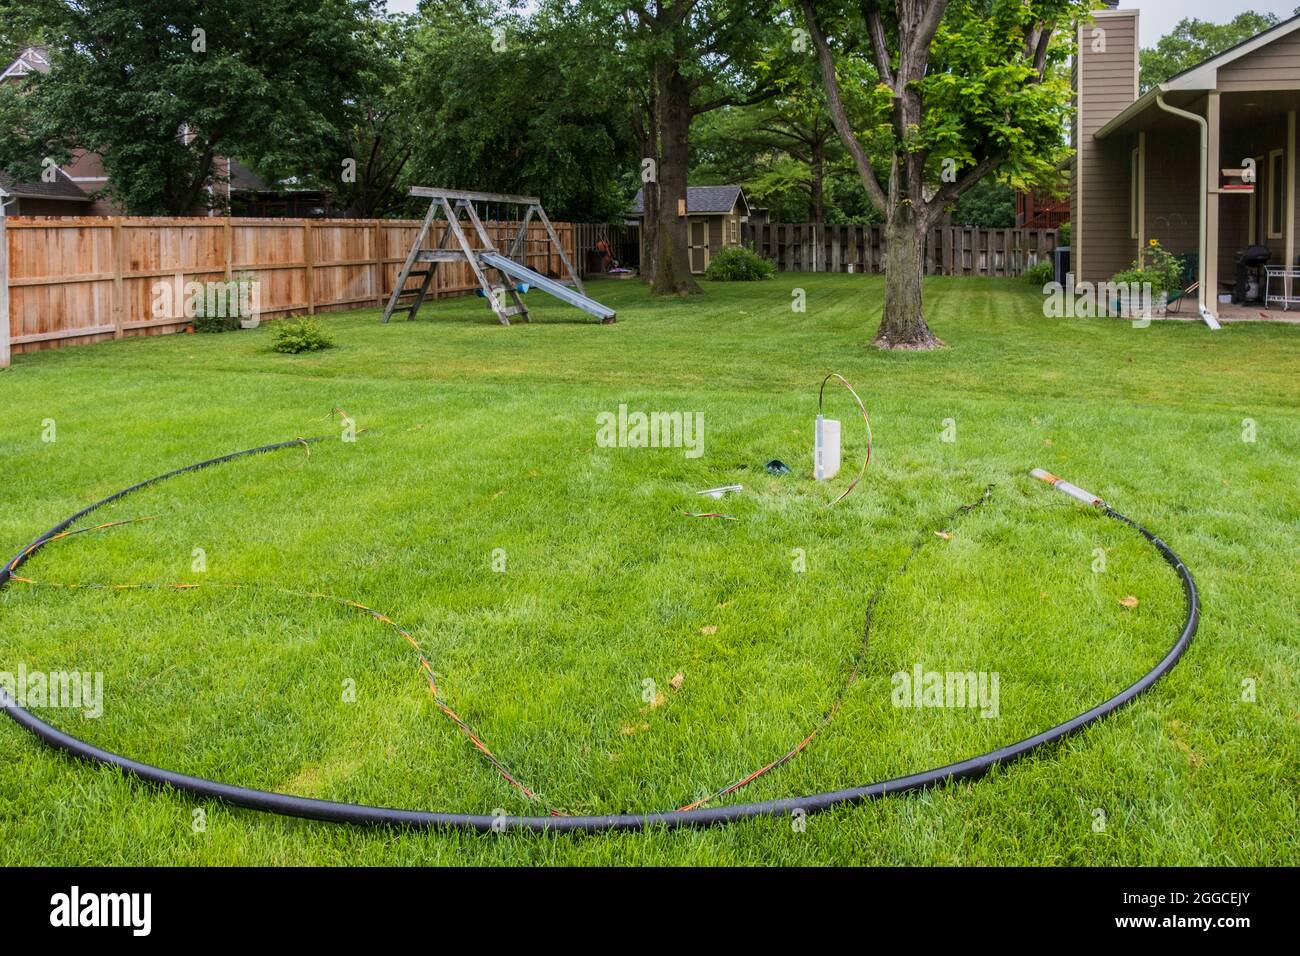 Faulty in ground lawn sprinkler pump and burnt wiring lying in tall fescue grass in the process of being changed out for a new pump. Kansas, USA. Stock Photo